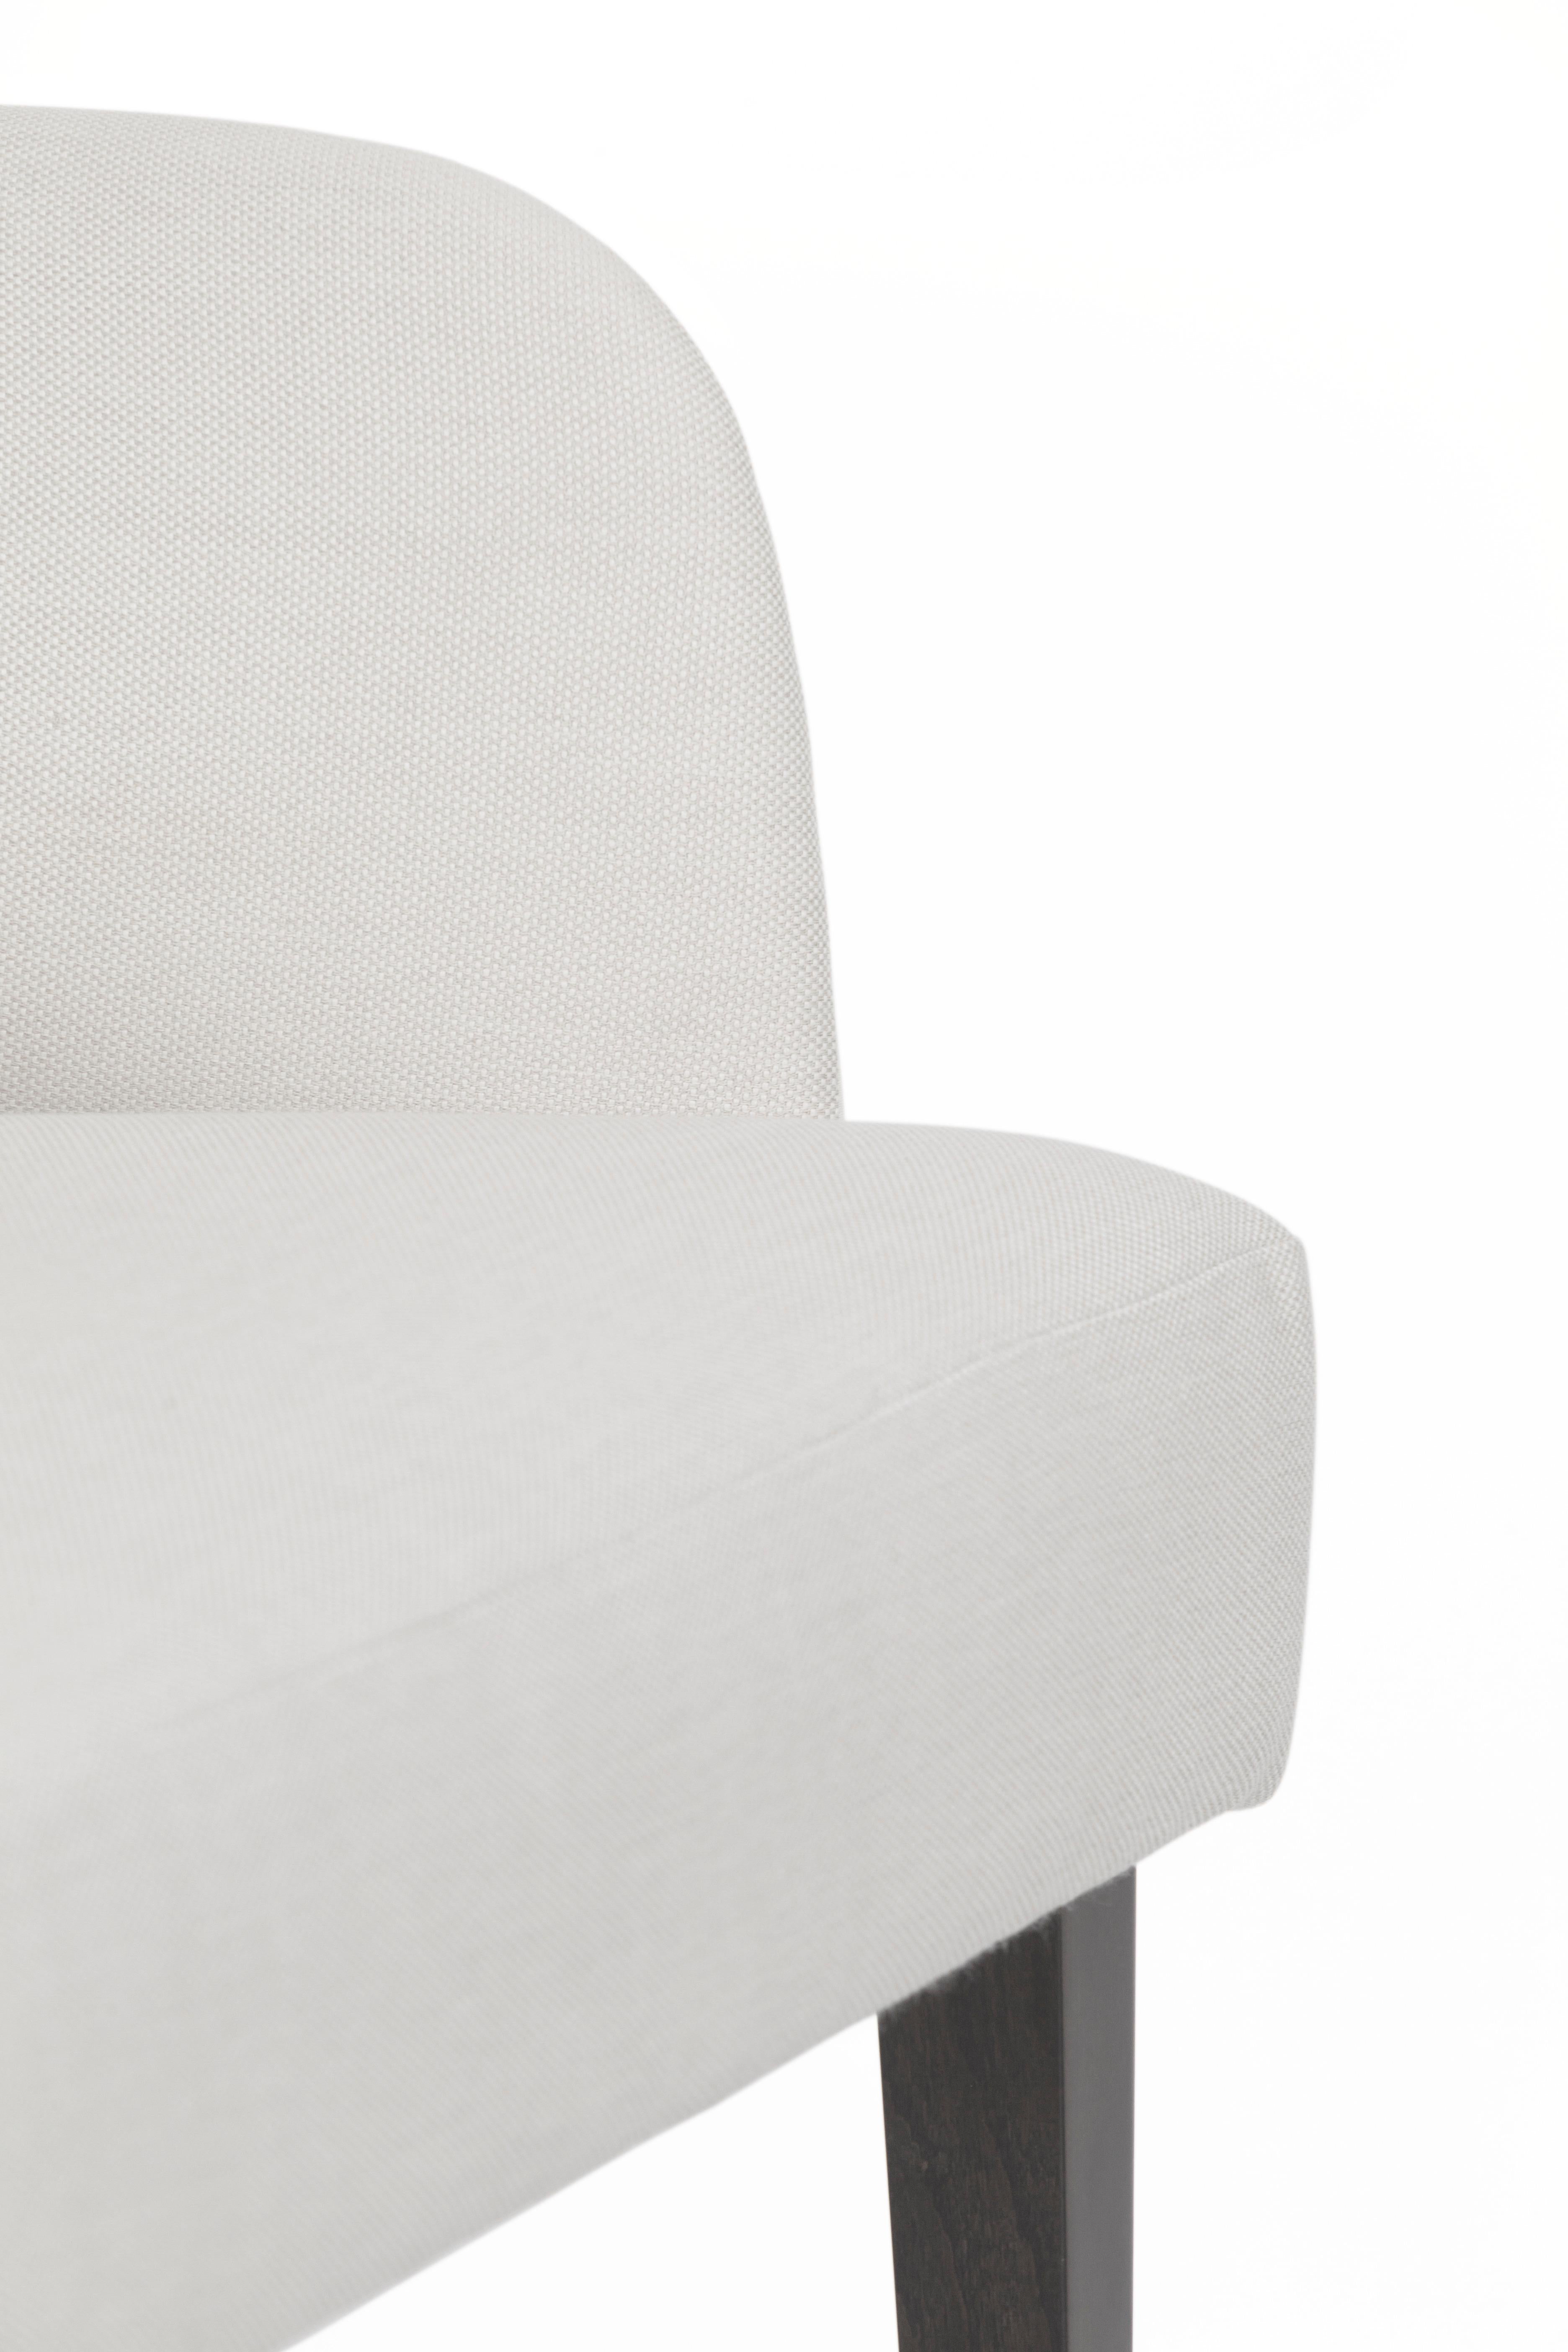 Hand-Crafted Modern Margot Dining Chairs, White Leather, Handmade in Portugal by Greenapple For Sale